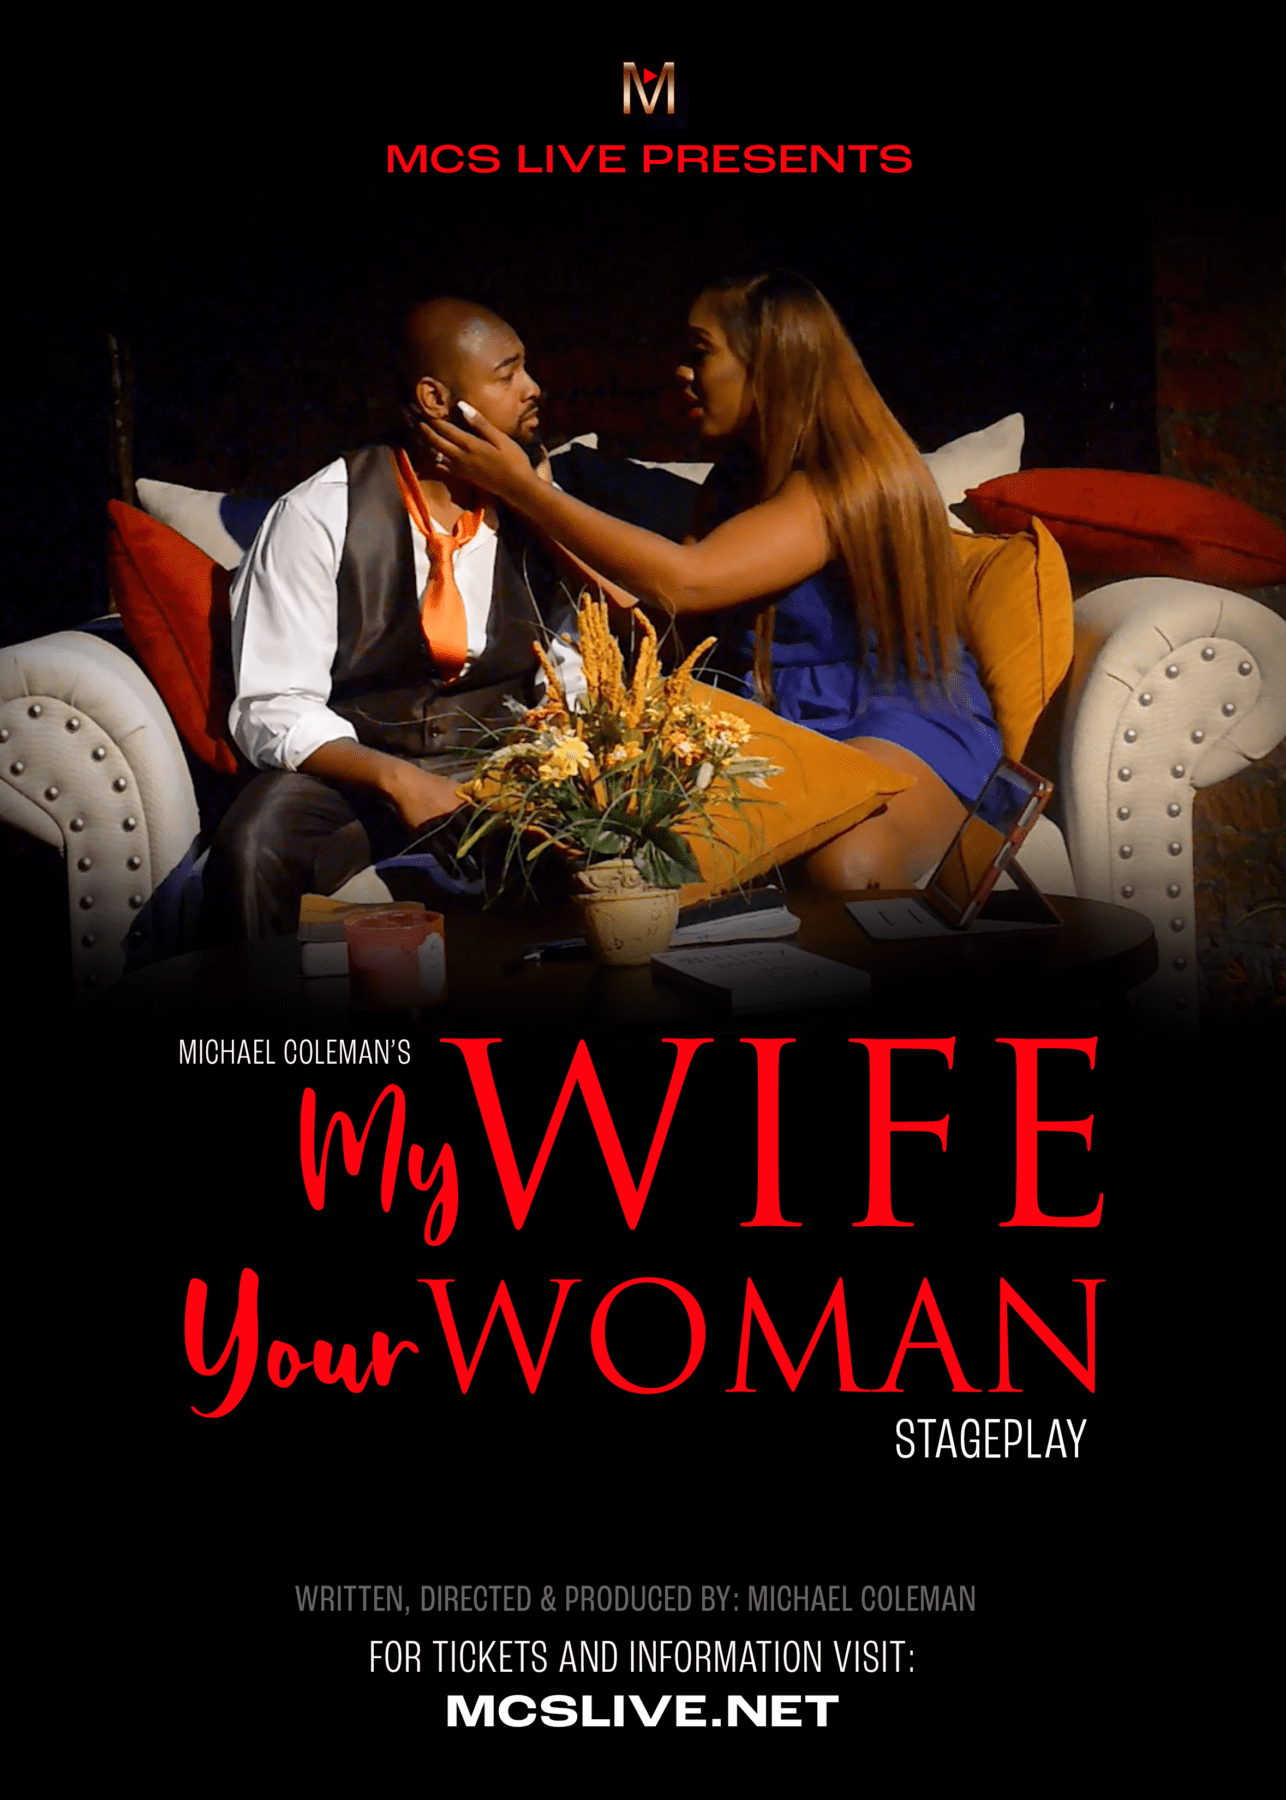 Michael Coleman’s “My Wife Your Woman”